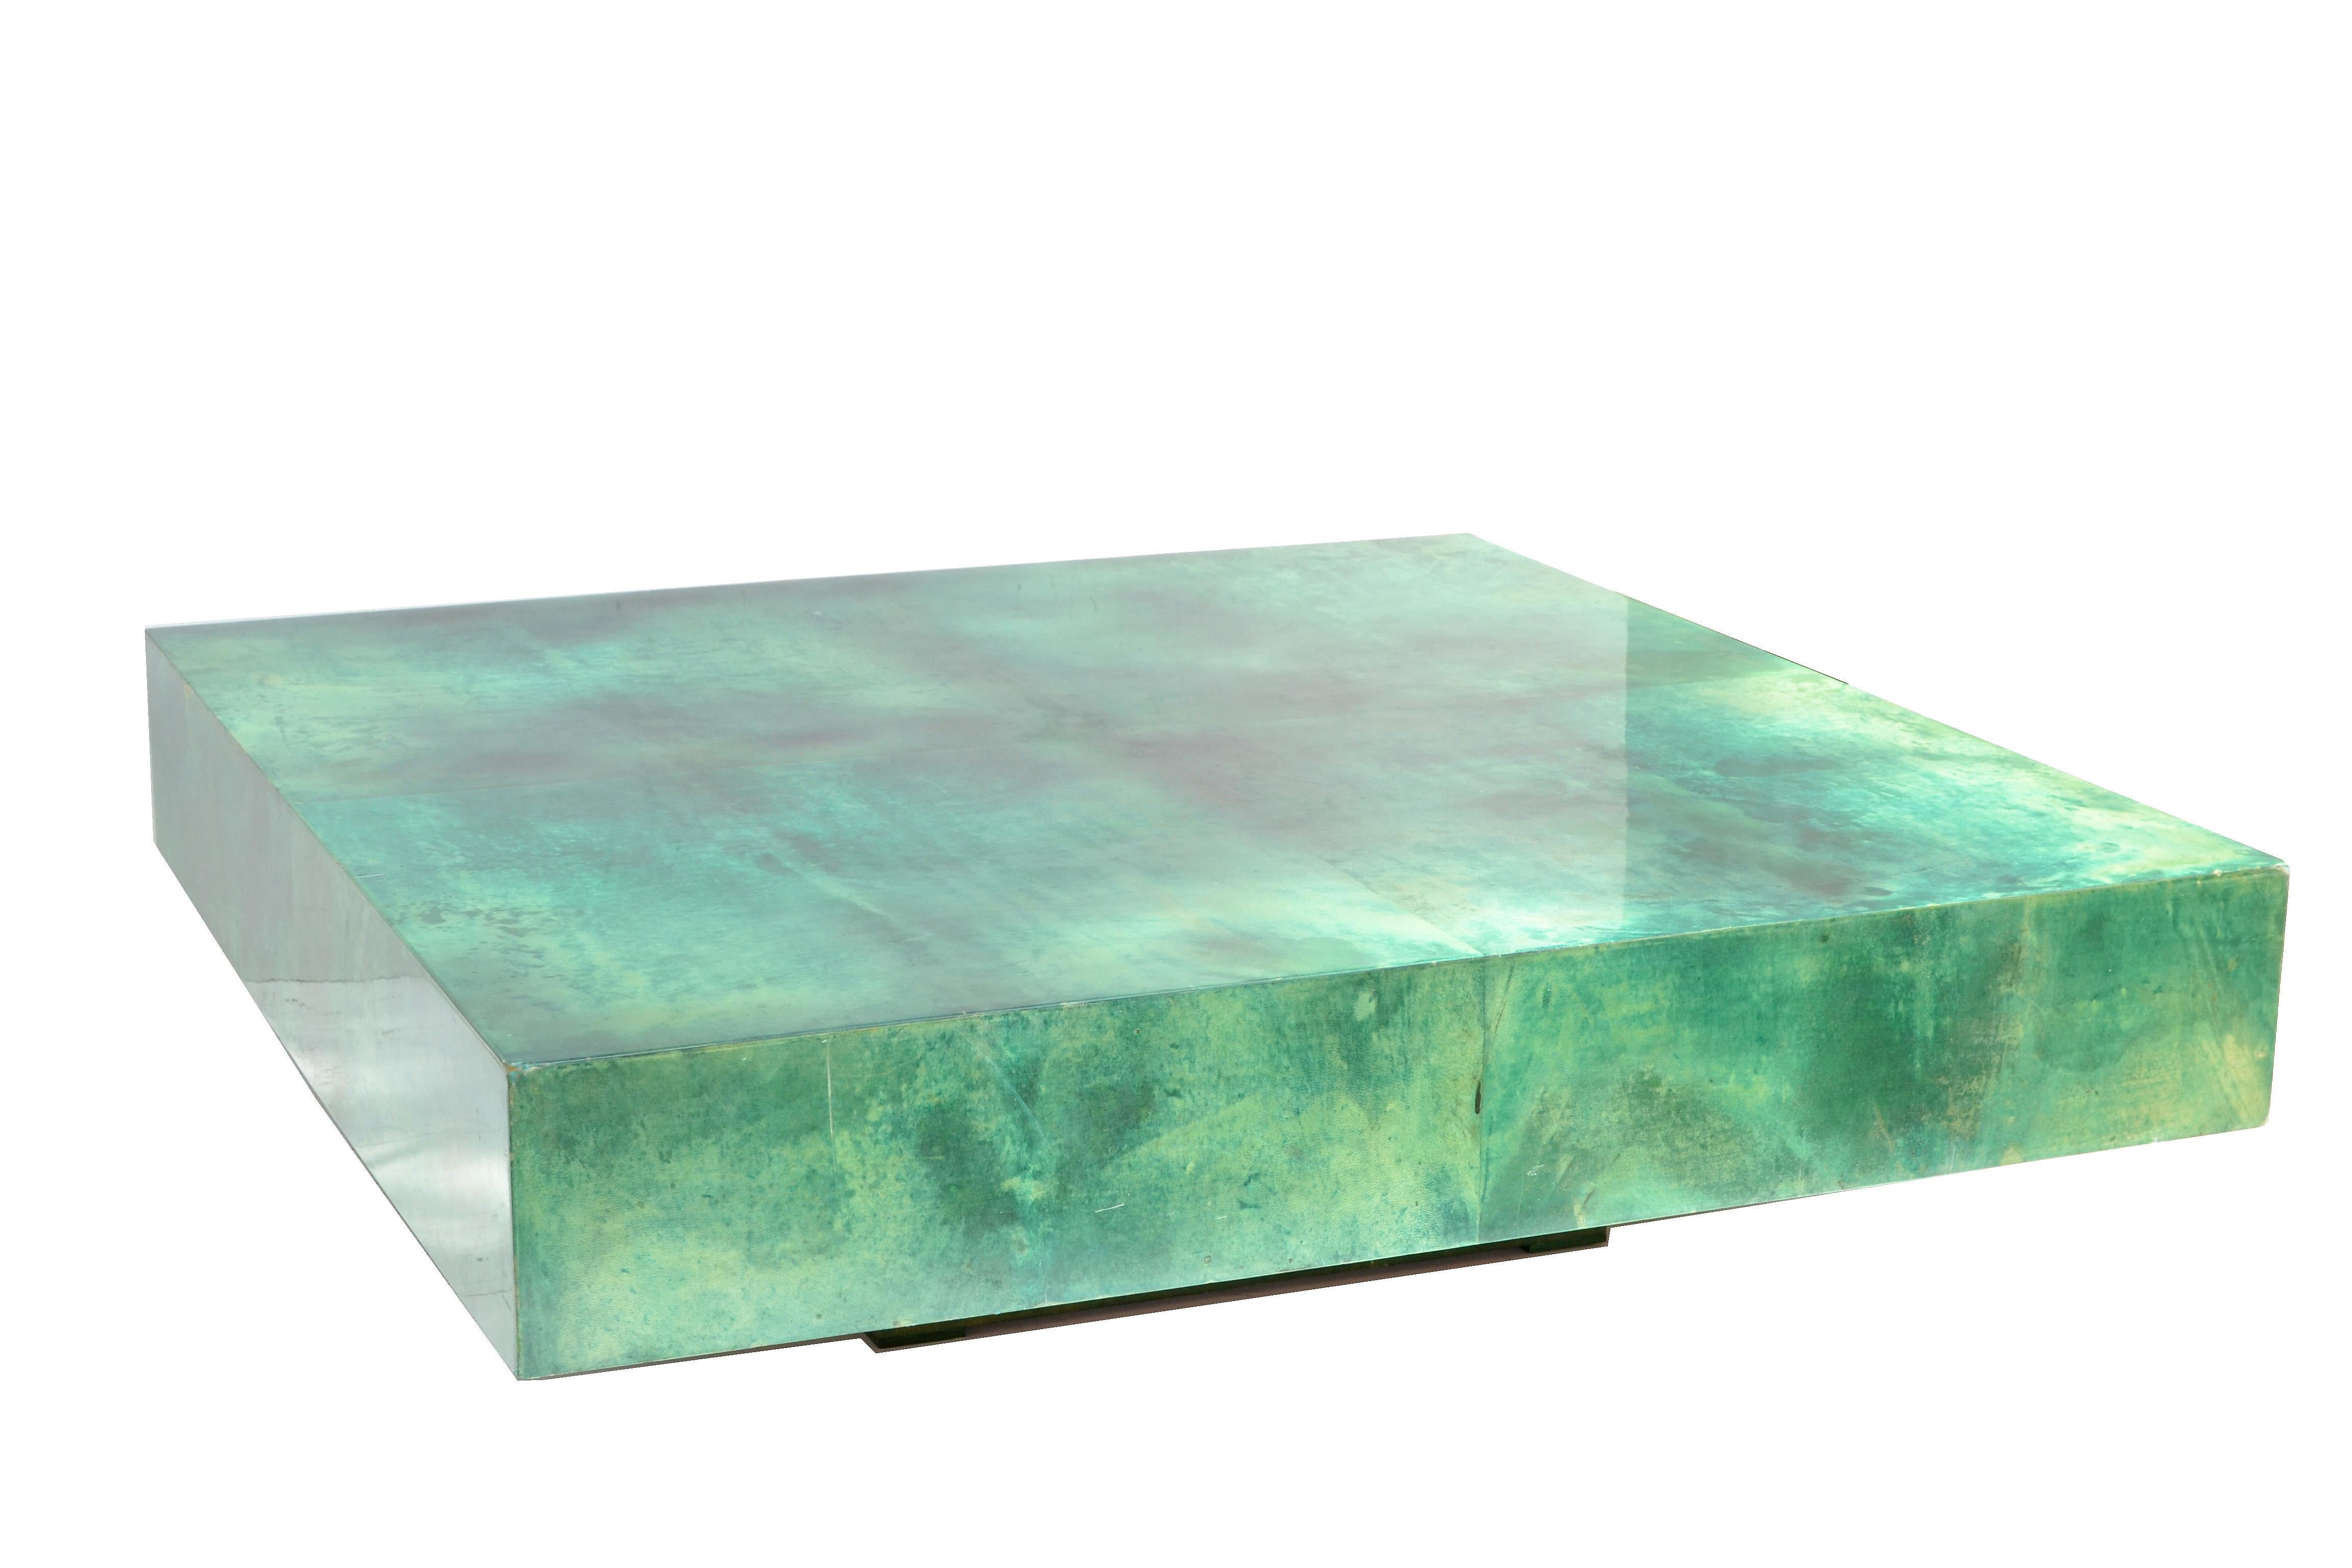 Huge Aldo Tura Coffee / Cocktail Table Emerald Green Lacquered Goatskin Top  2